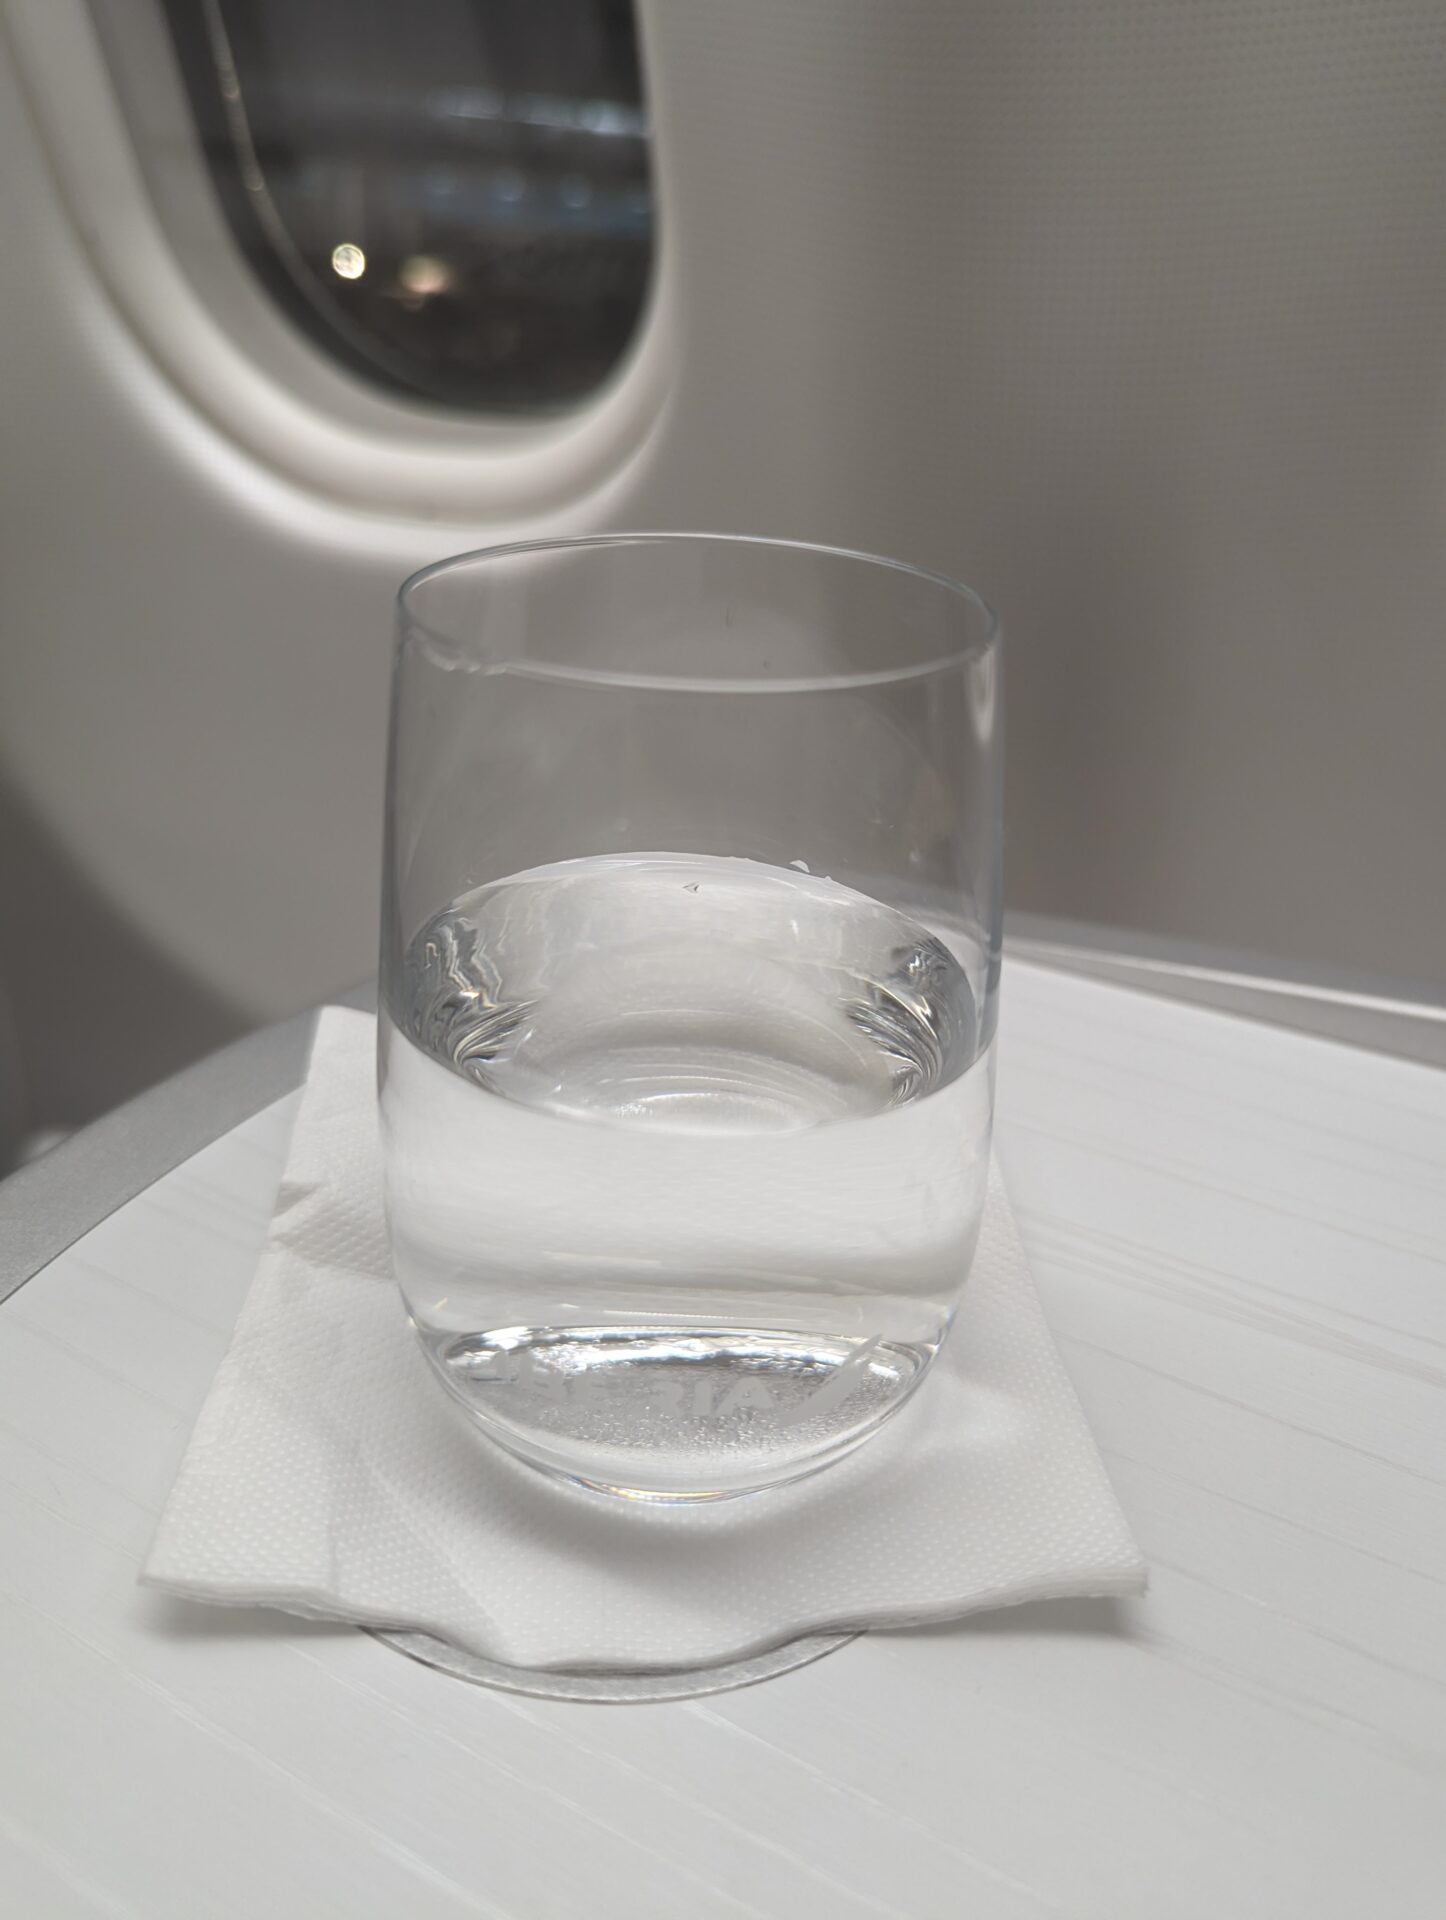 a glass of water on a napkin